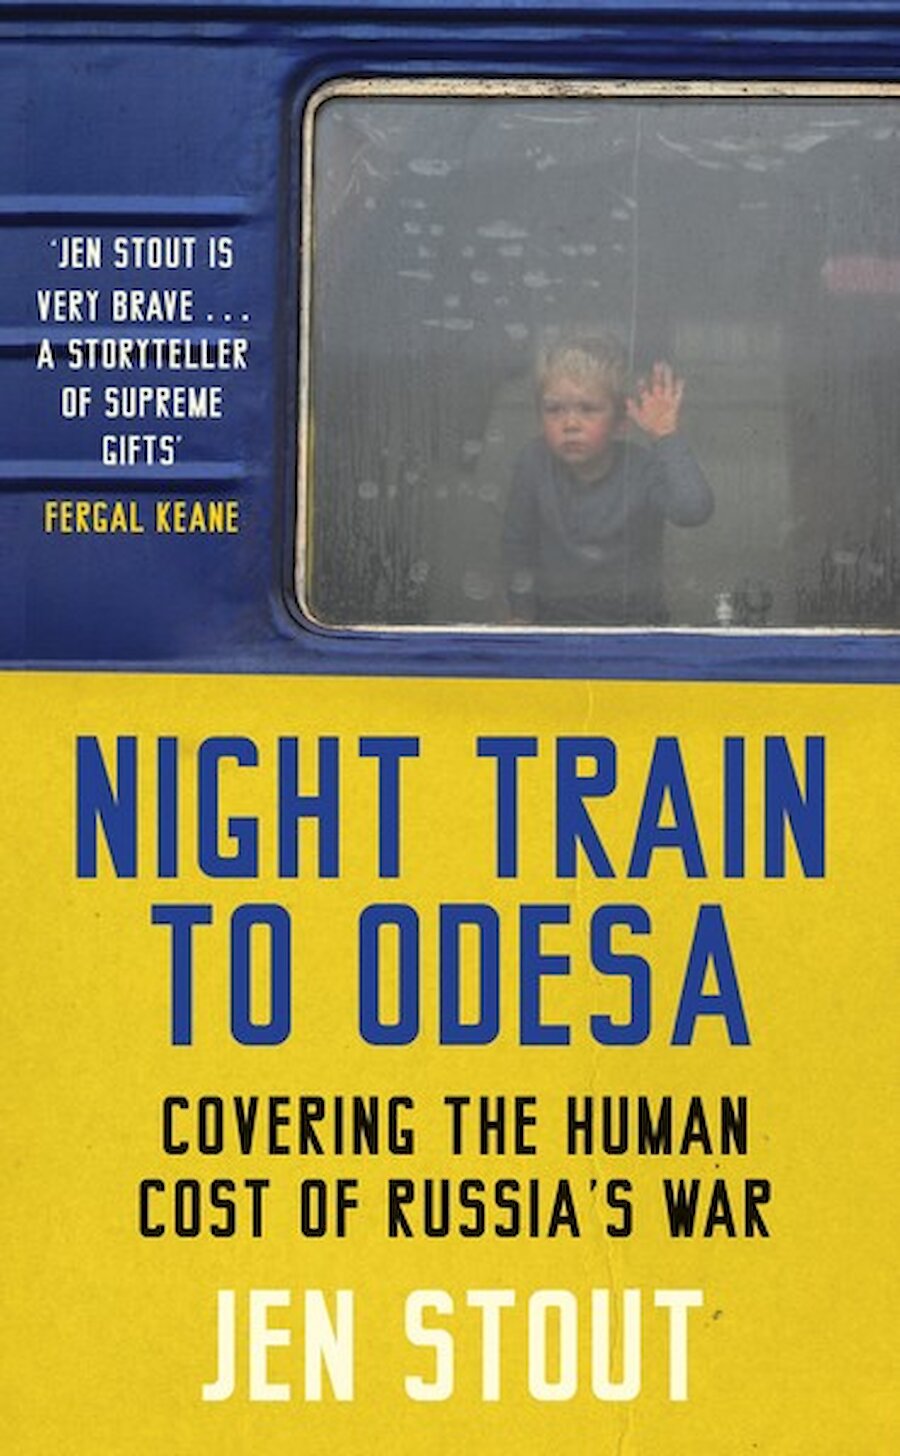 Night Train to Odesa is published by Polygon. | Polygon